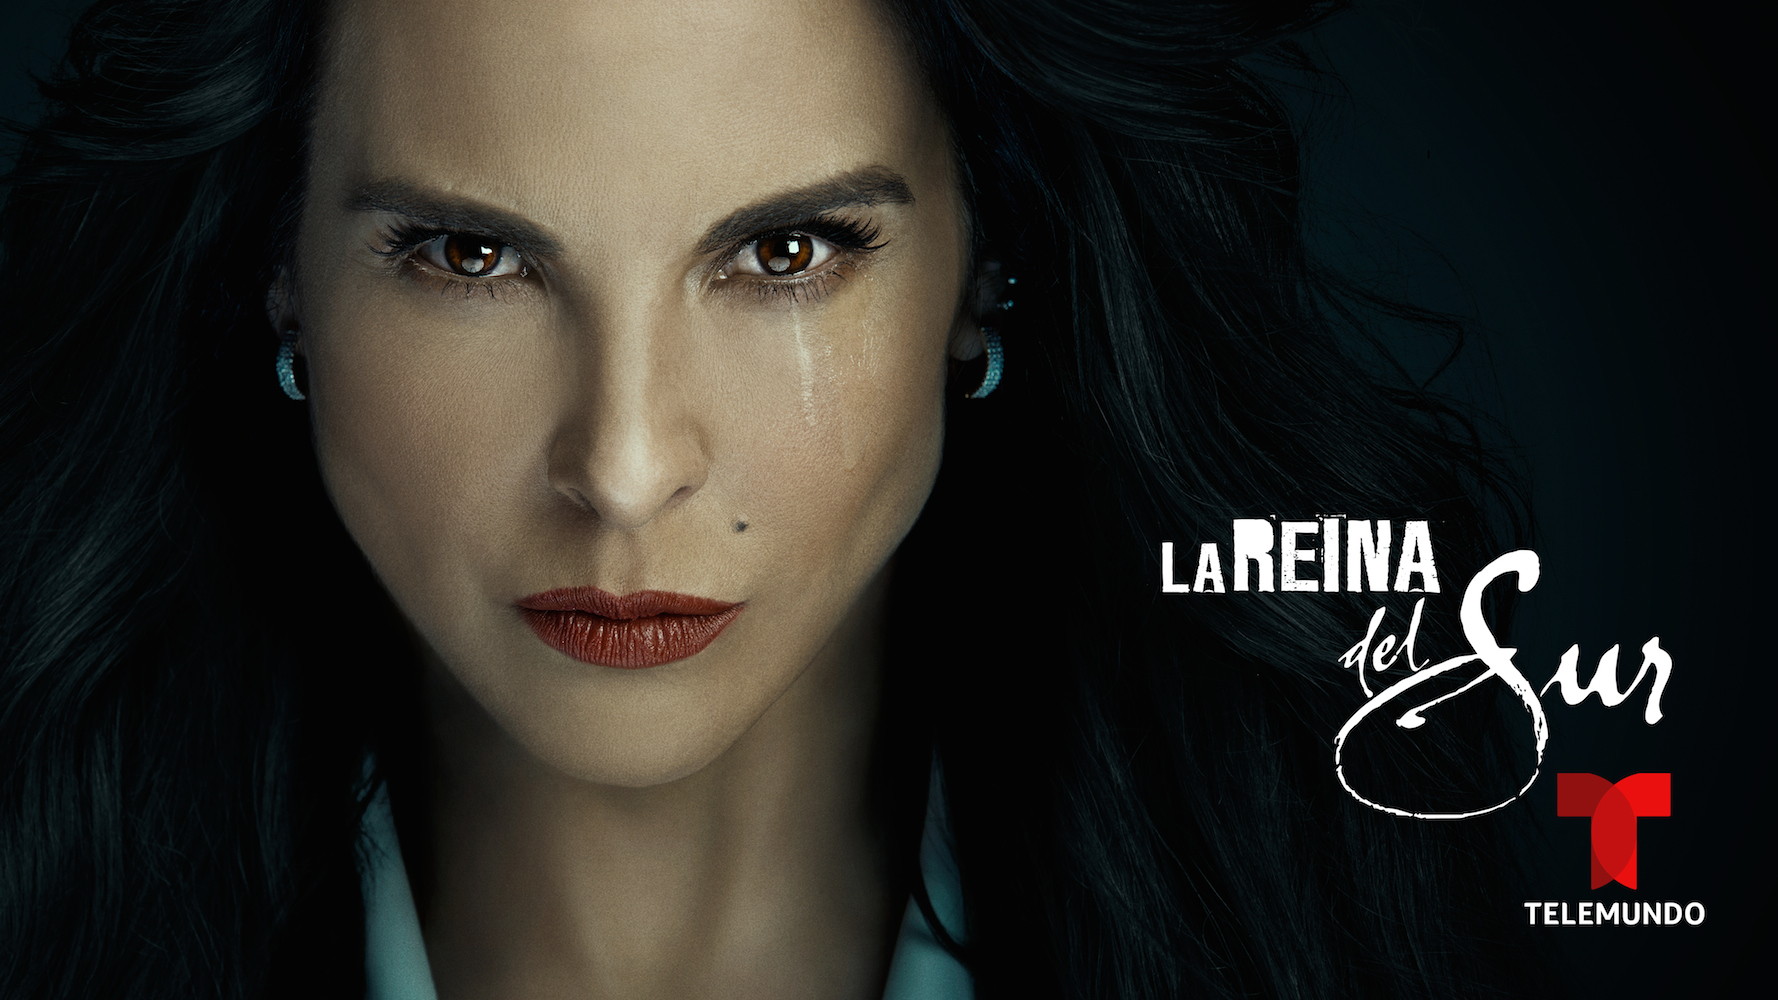 8 Years Later, 'La Reina del Sur' Is Back With Season 2